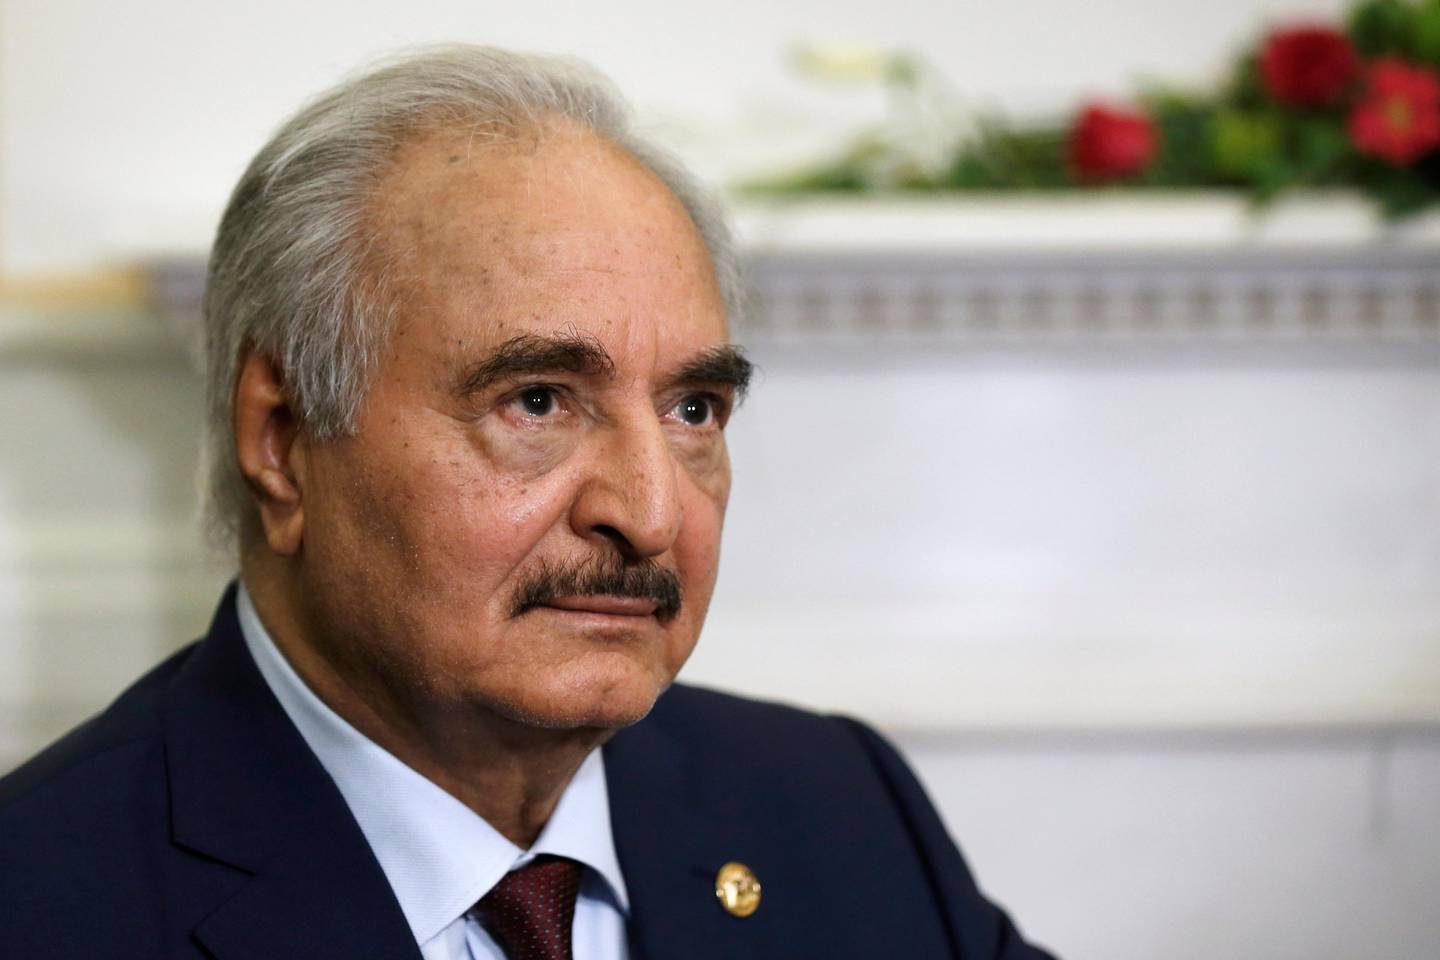 Libyan commander Khalifa Haftar meets Greek Foreign Minister Nikos Dendias (not pictured) at the Foreign Ministry in Athens, Greece, January 17, 2020. REUTERS/Costas Baltas